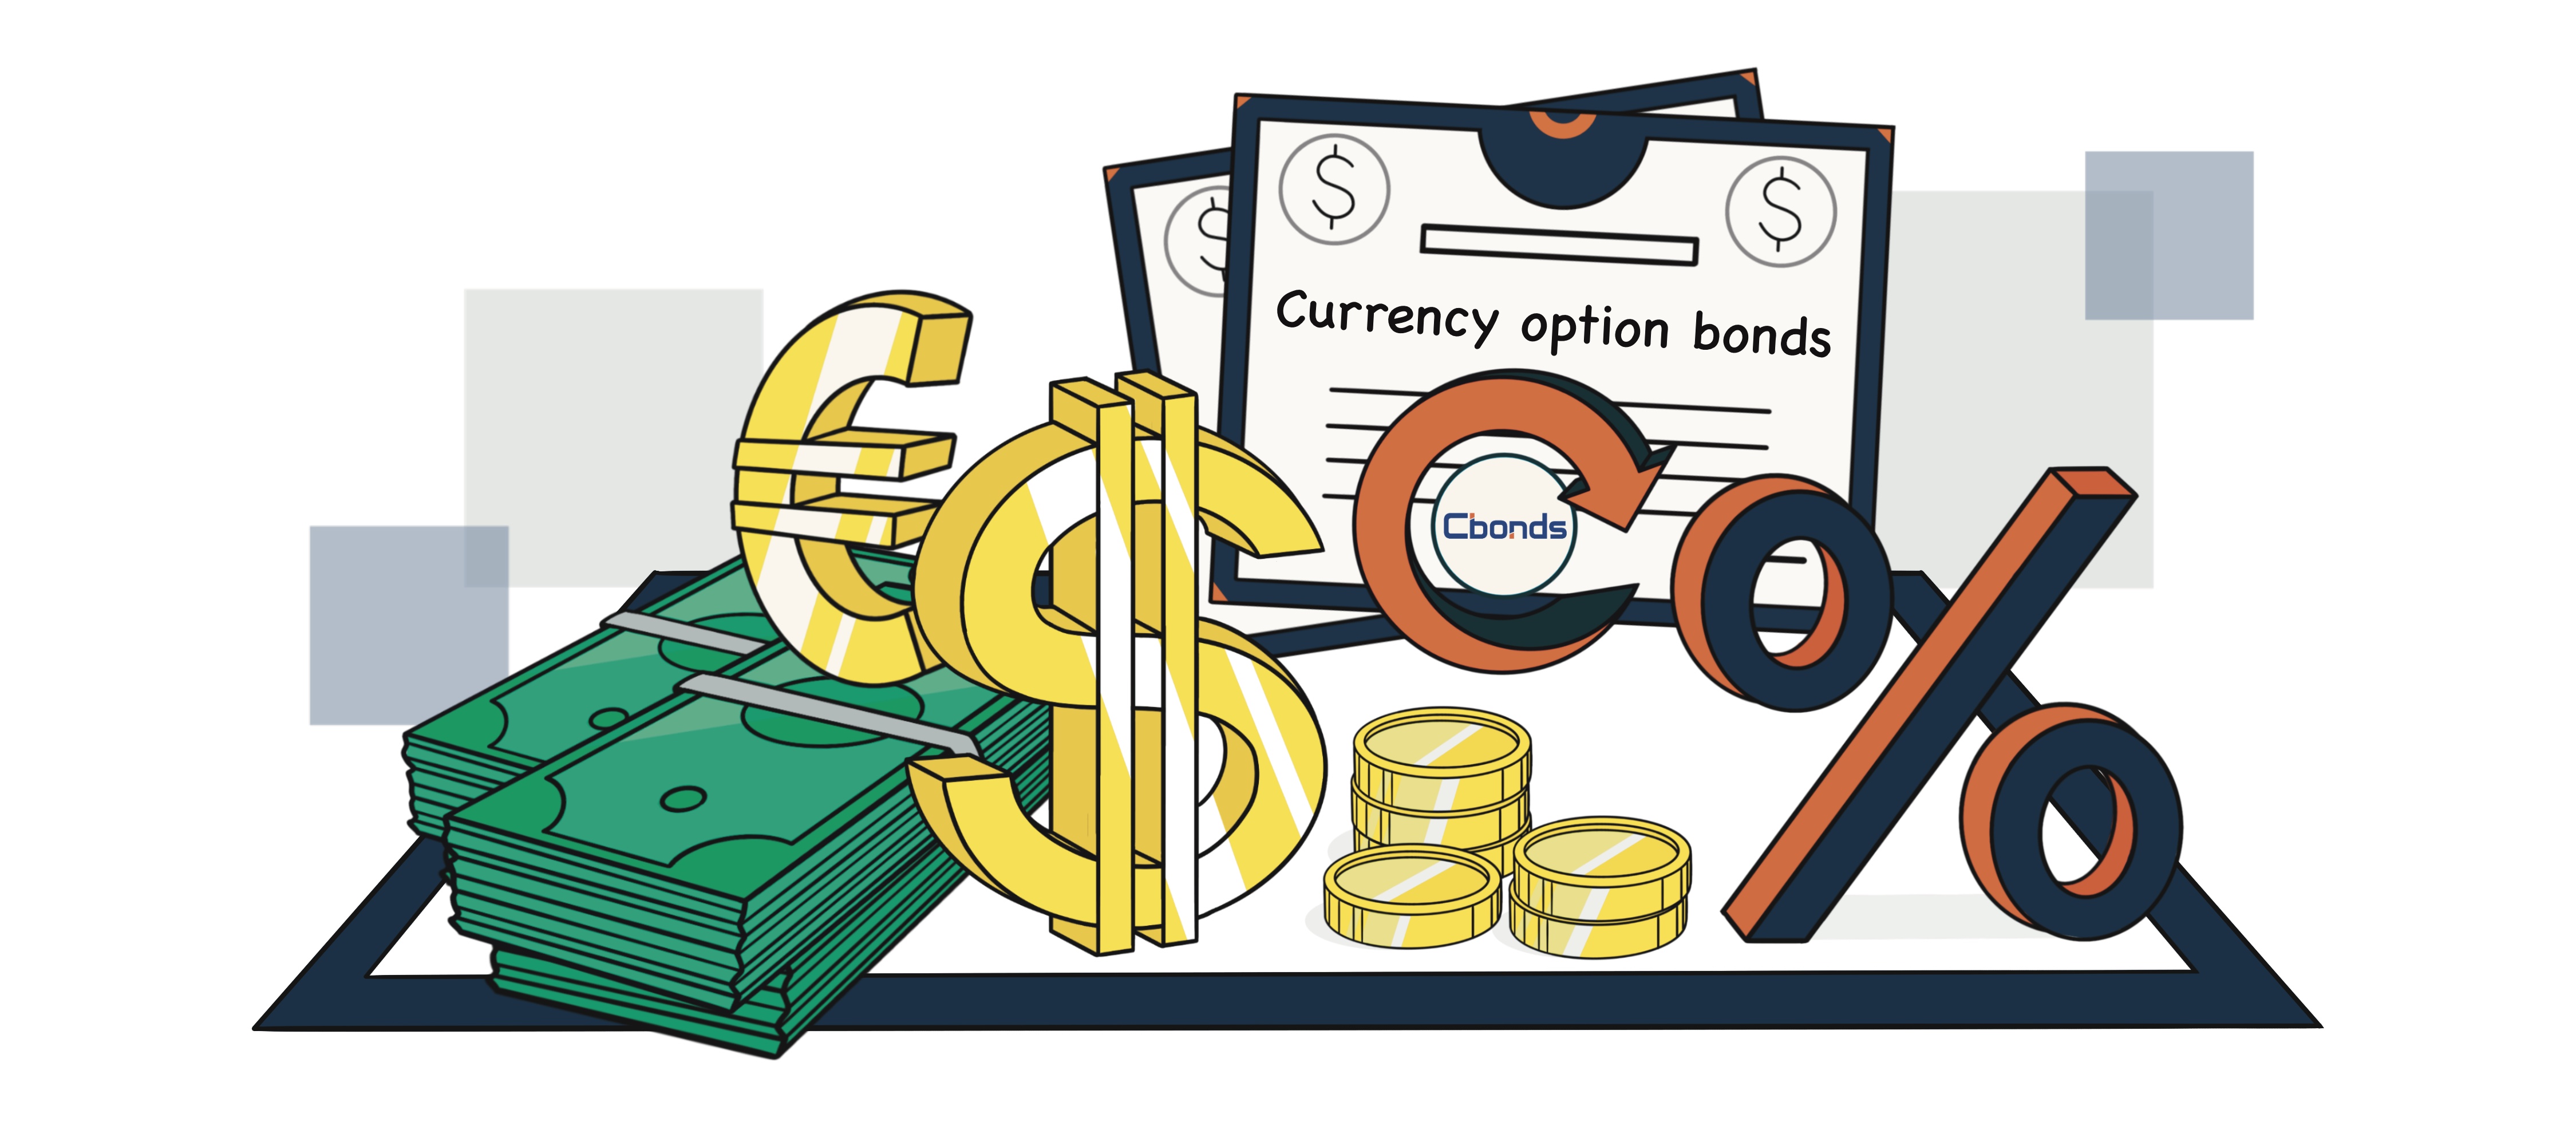 Currency option bonds